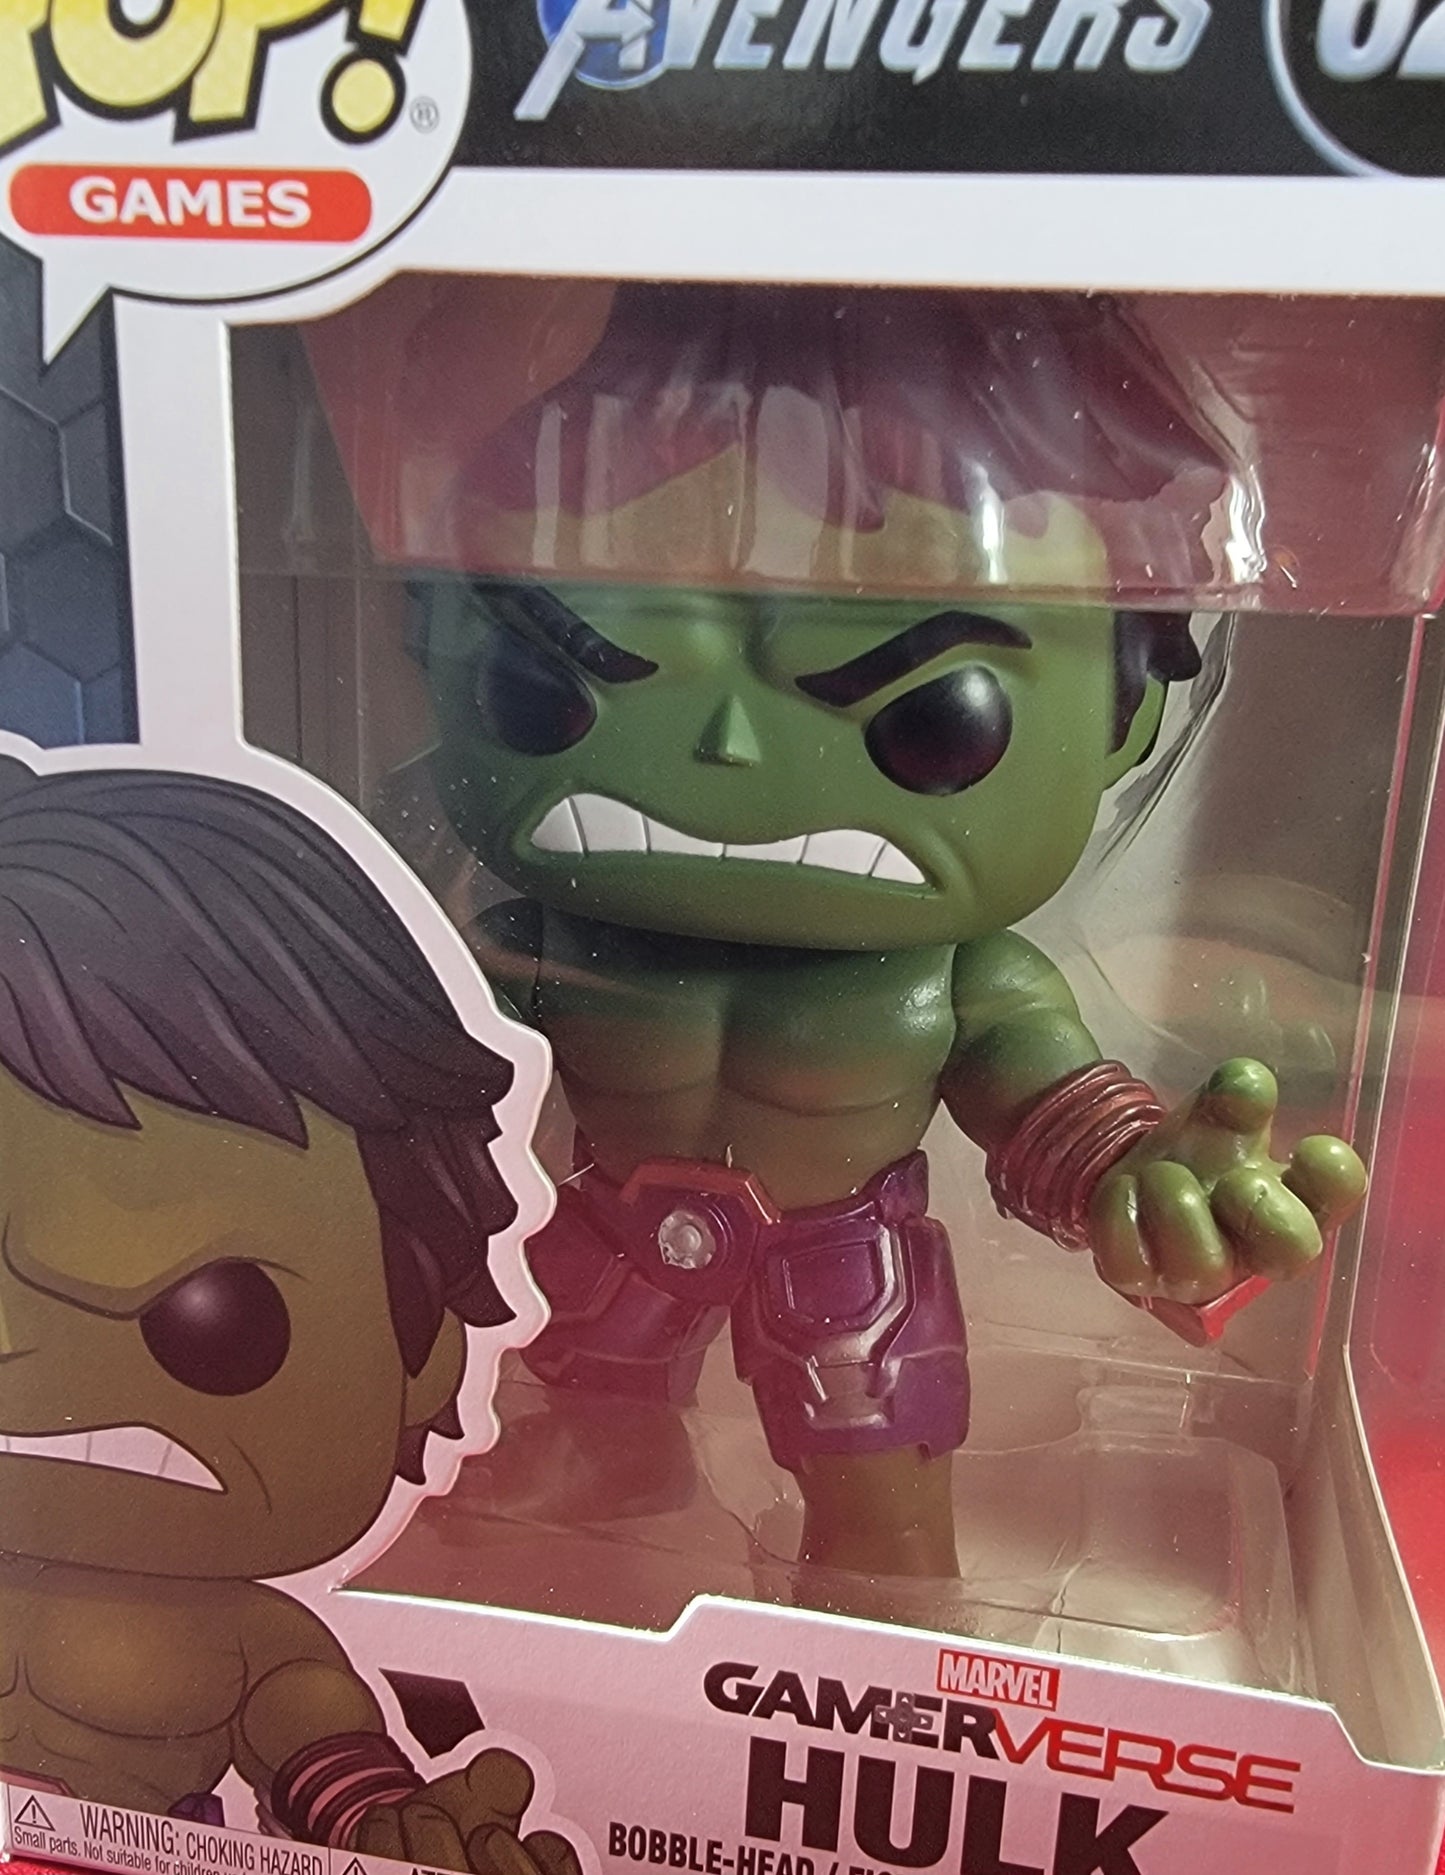 Hulk funko # 629 (nib)
brand new gamerverse marvel avengers hulk. pop has Hulk in metallic green. pop is in near perfect condition and will be shipped in a compatible pop protector.